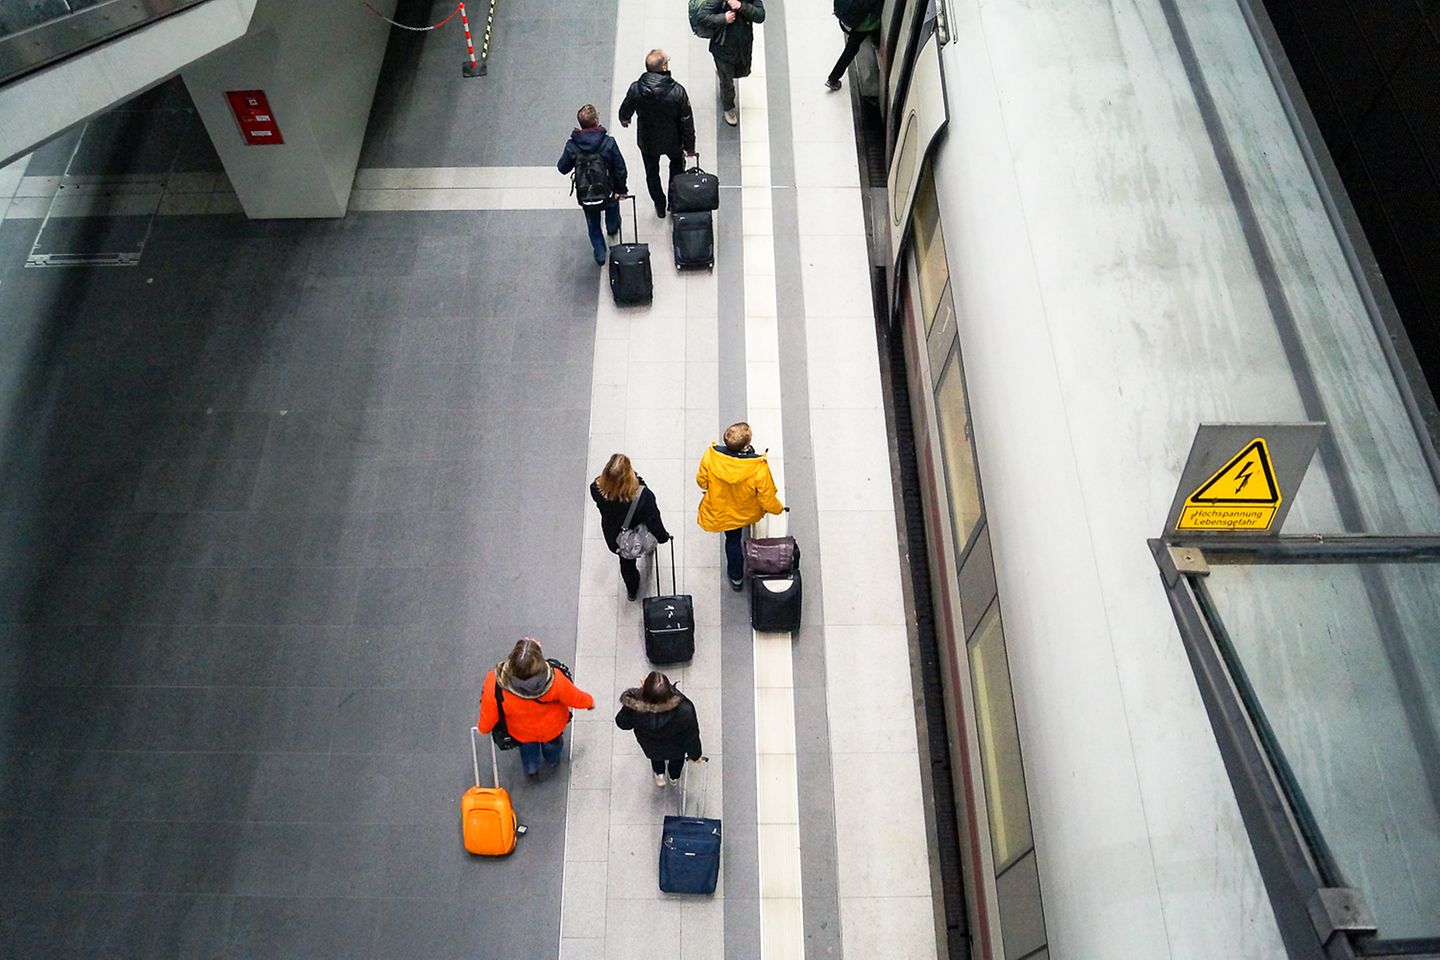 Aerial view of a platform. Travellers pull their bags along next to a waiting train.